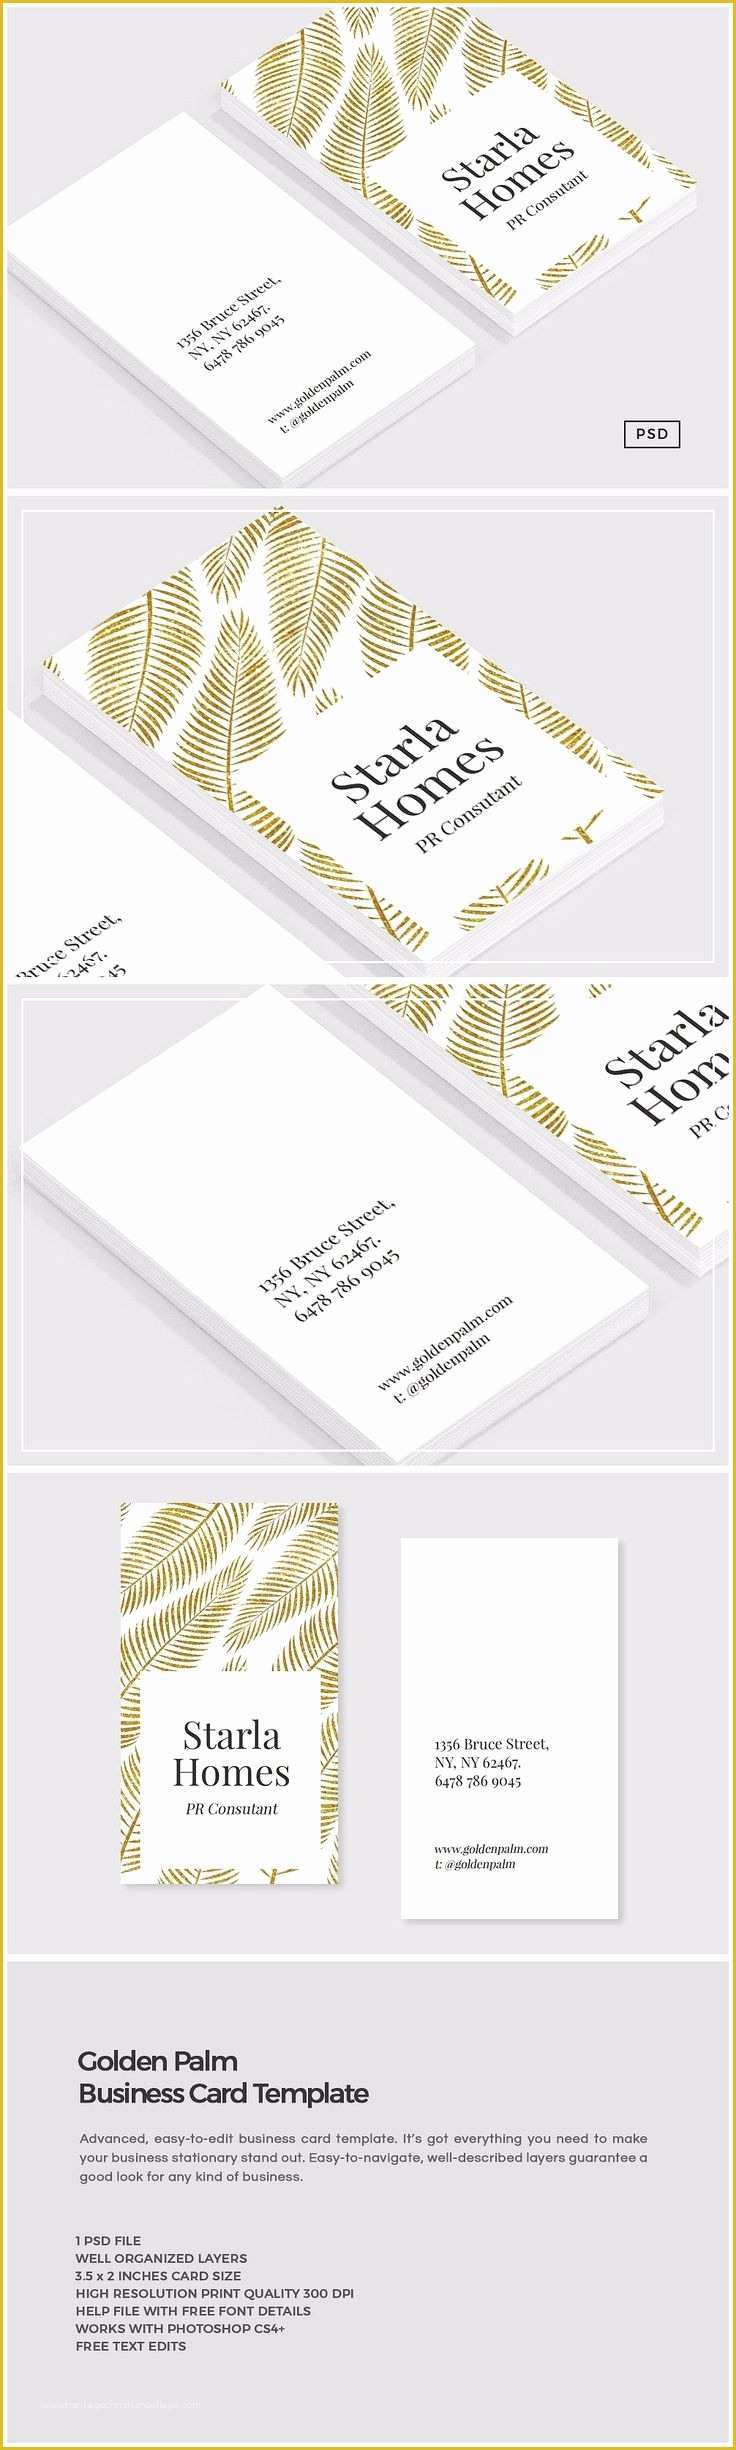 Business Card Template Maker Free Of How Can I Make Business Cards at Home for Free Free